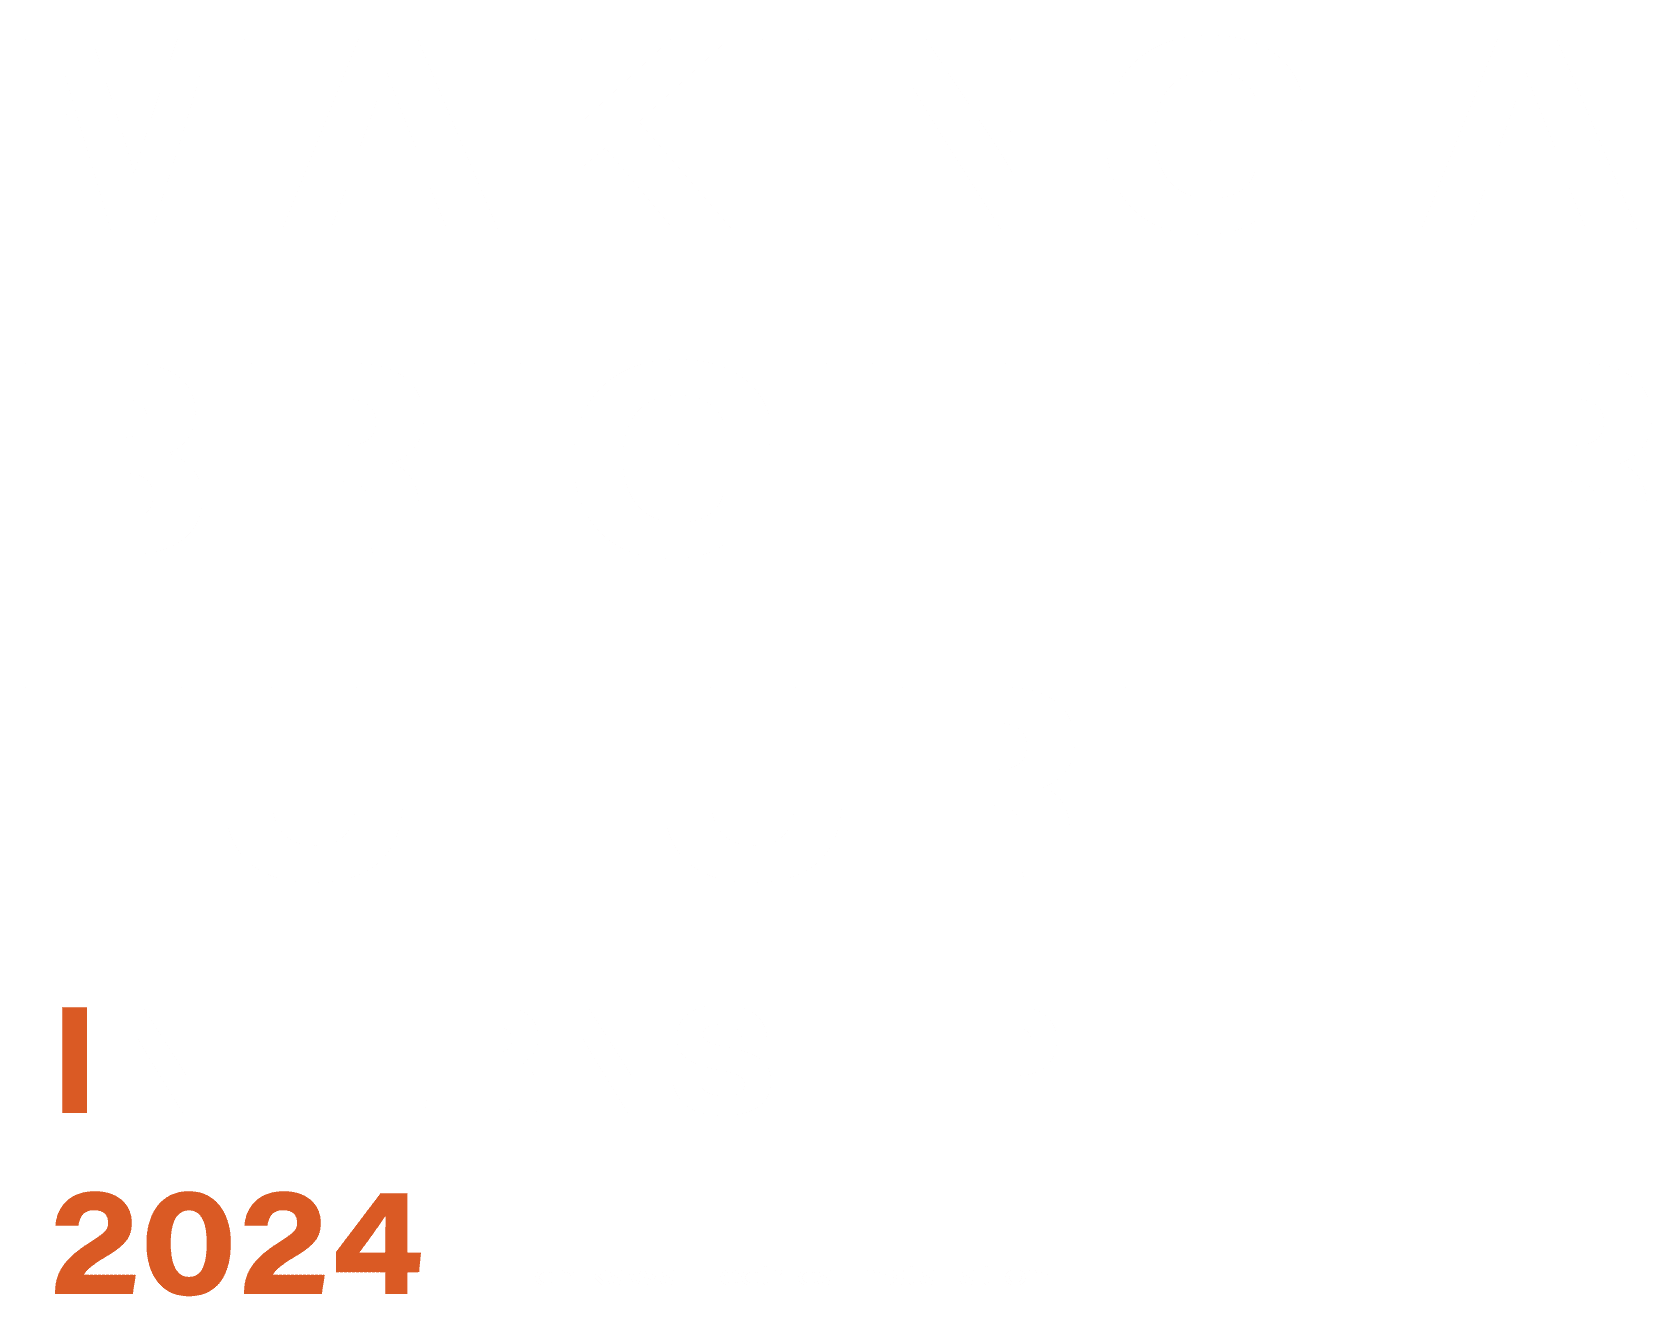 MAKING A BRIGTHER FUTURE INTERSHIP 2024